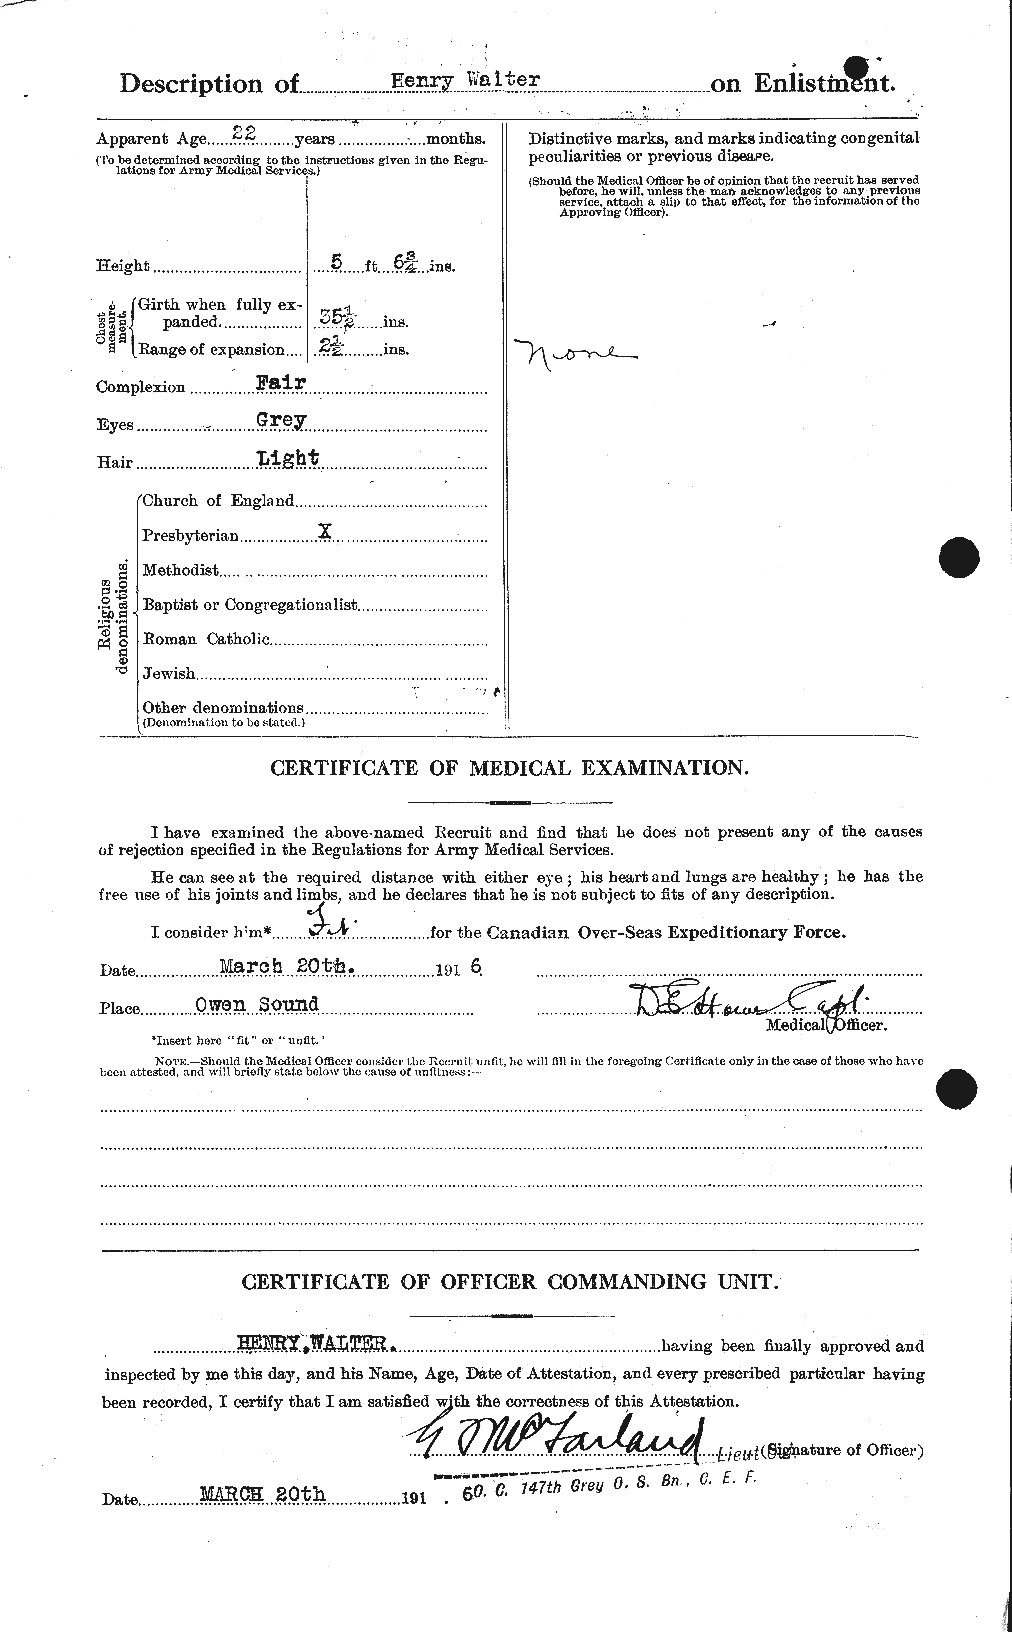 Personnel Records of the First World War - CEF 387751b